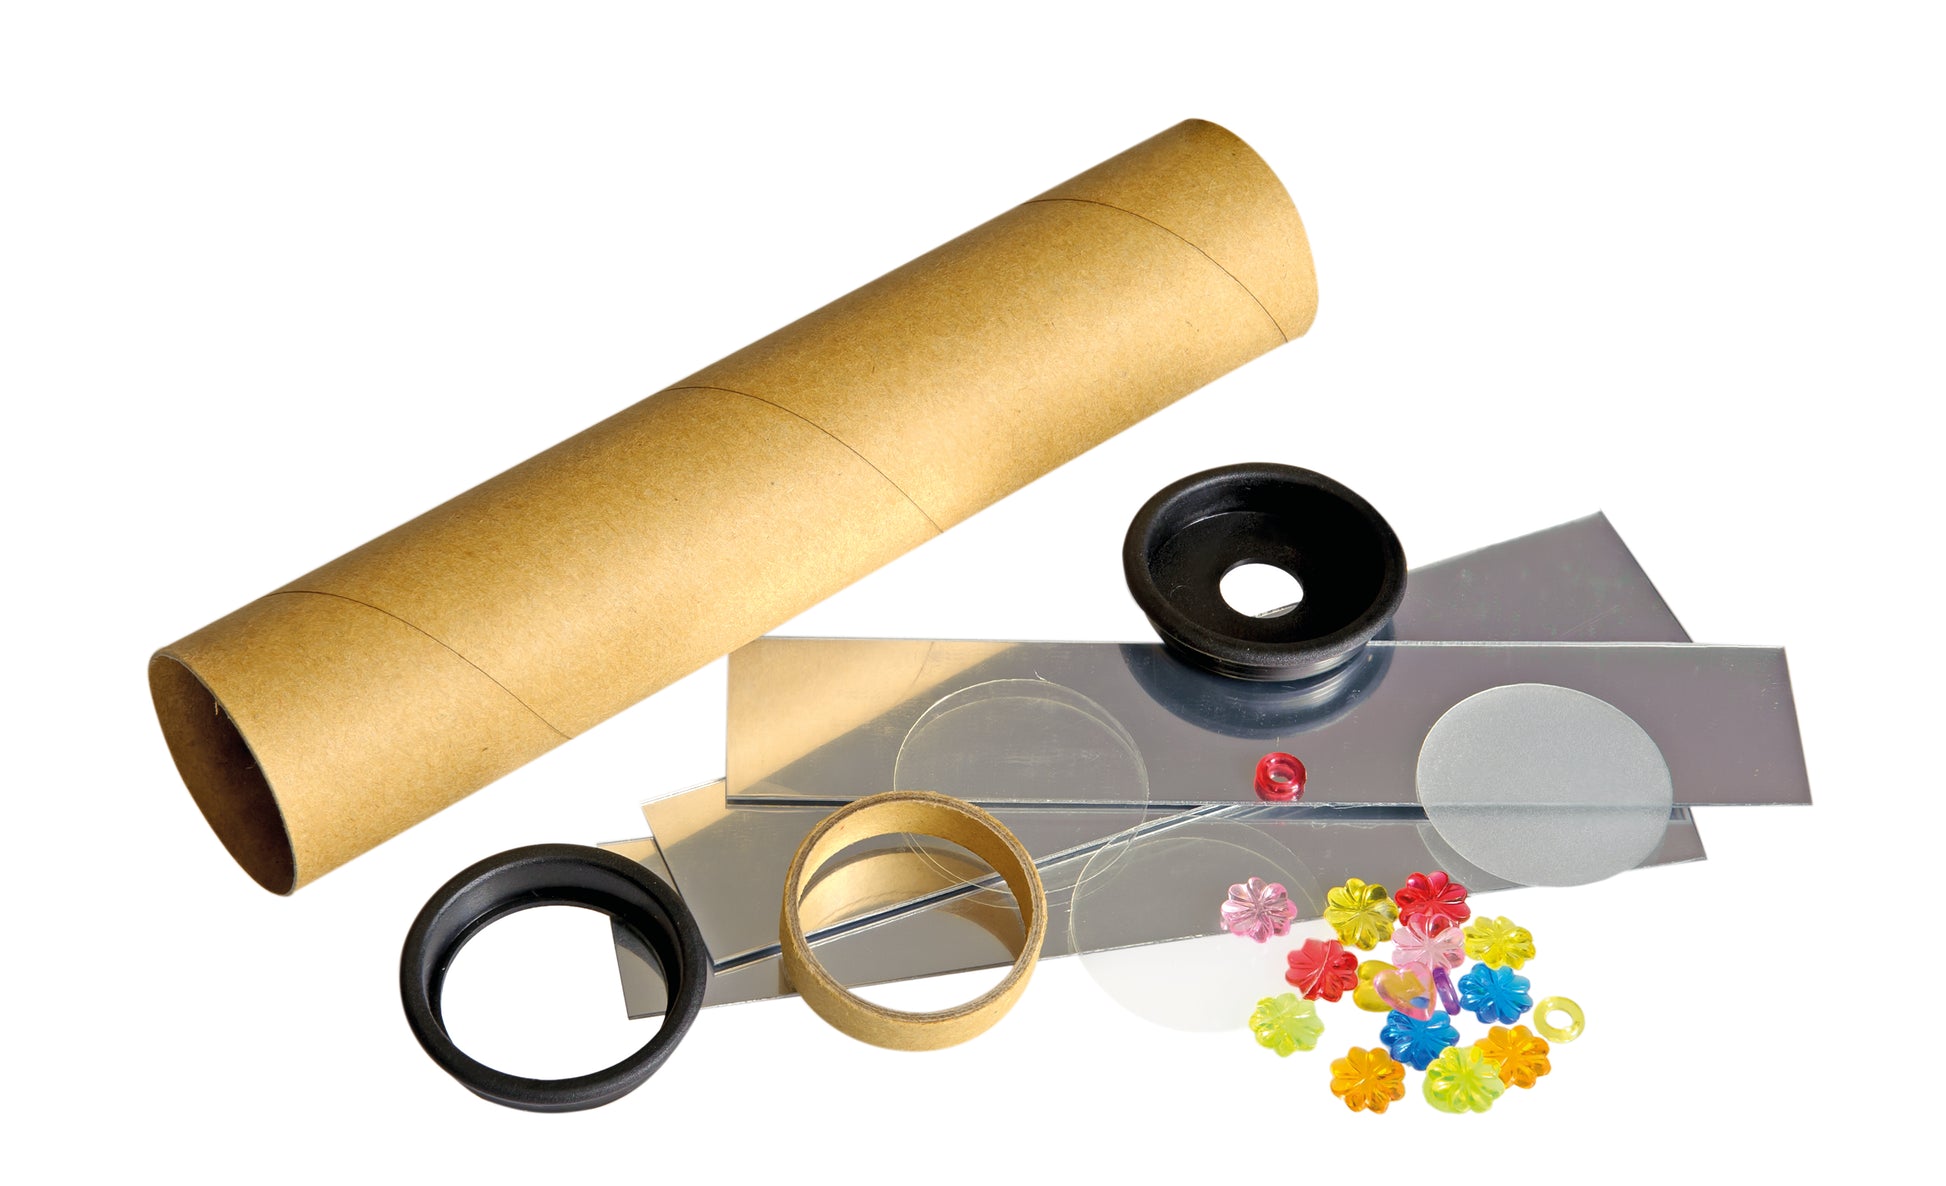 Material supplied to make a DIY kaleidoscope